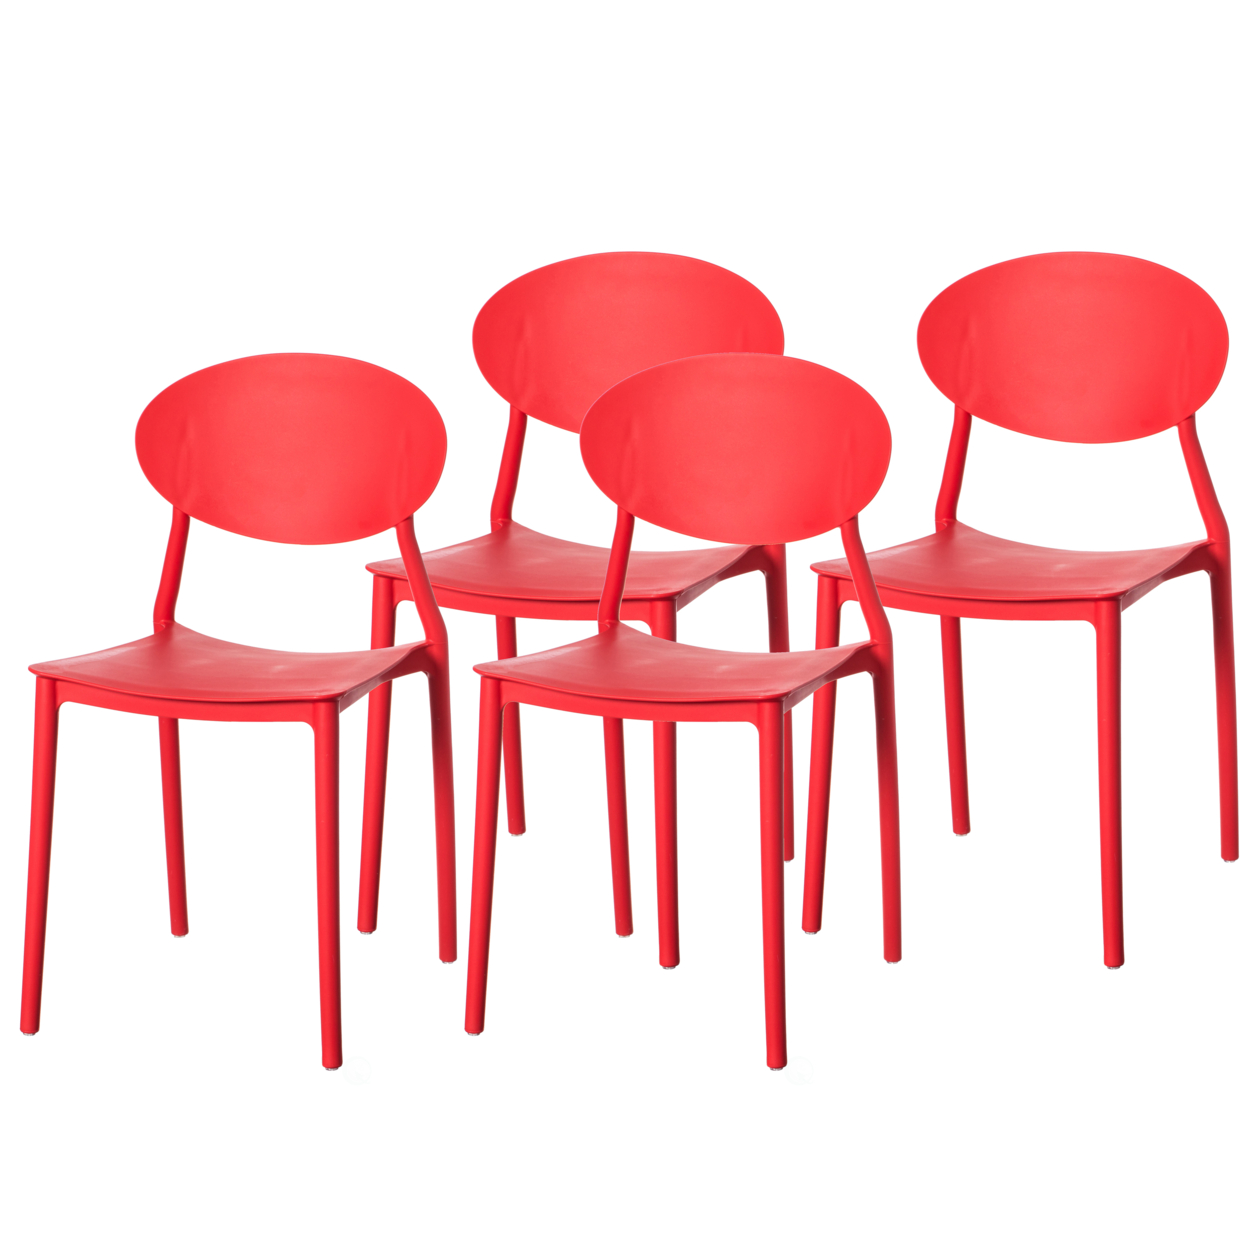 Modern Plastic Outdoor Dining Chair With Open Oval Back Design - Set Of 4 Red